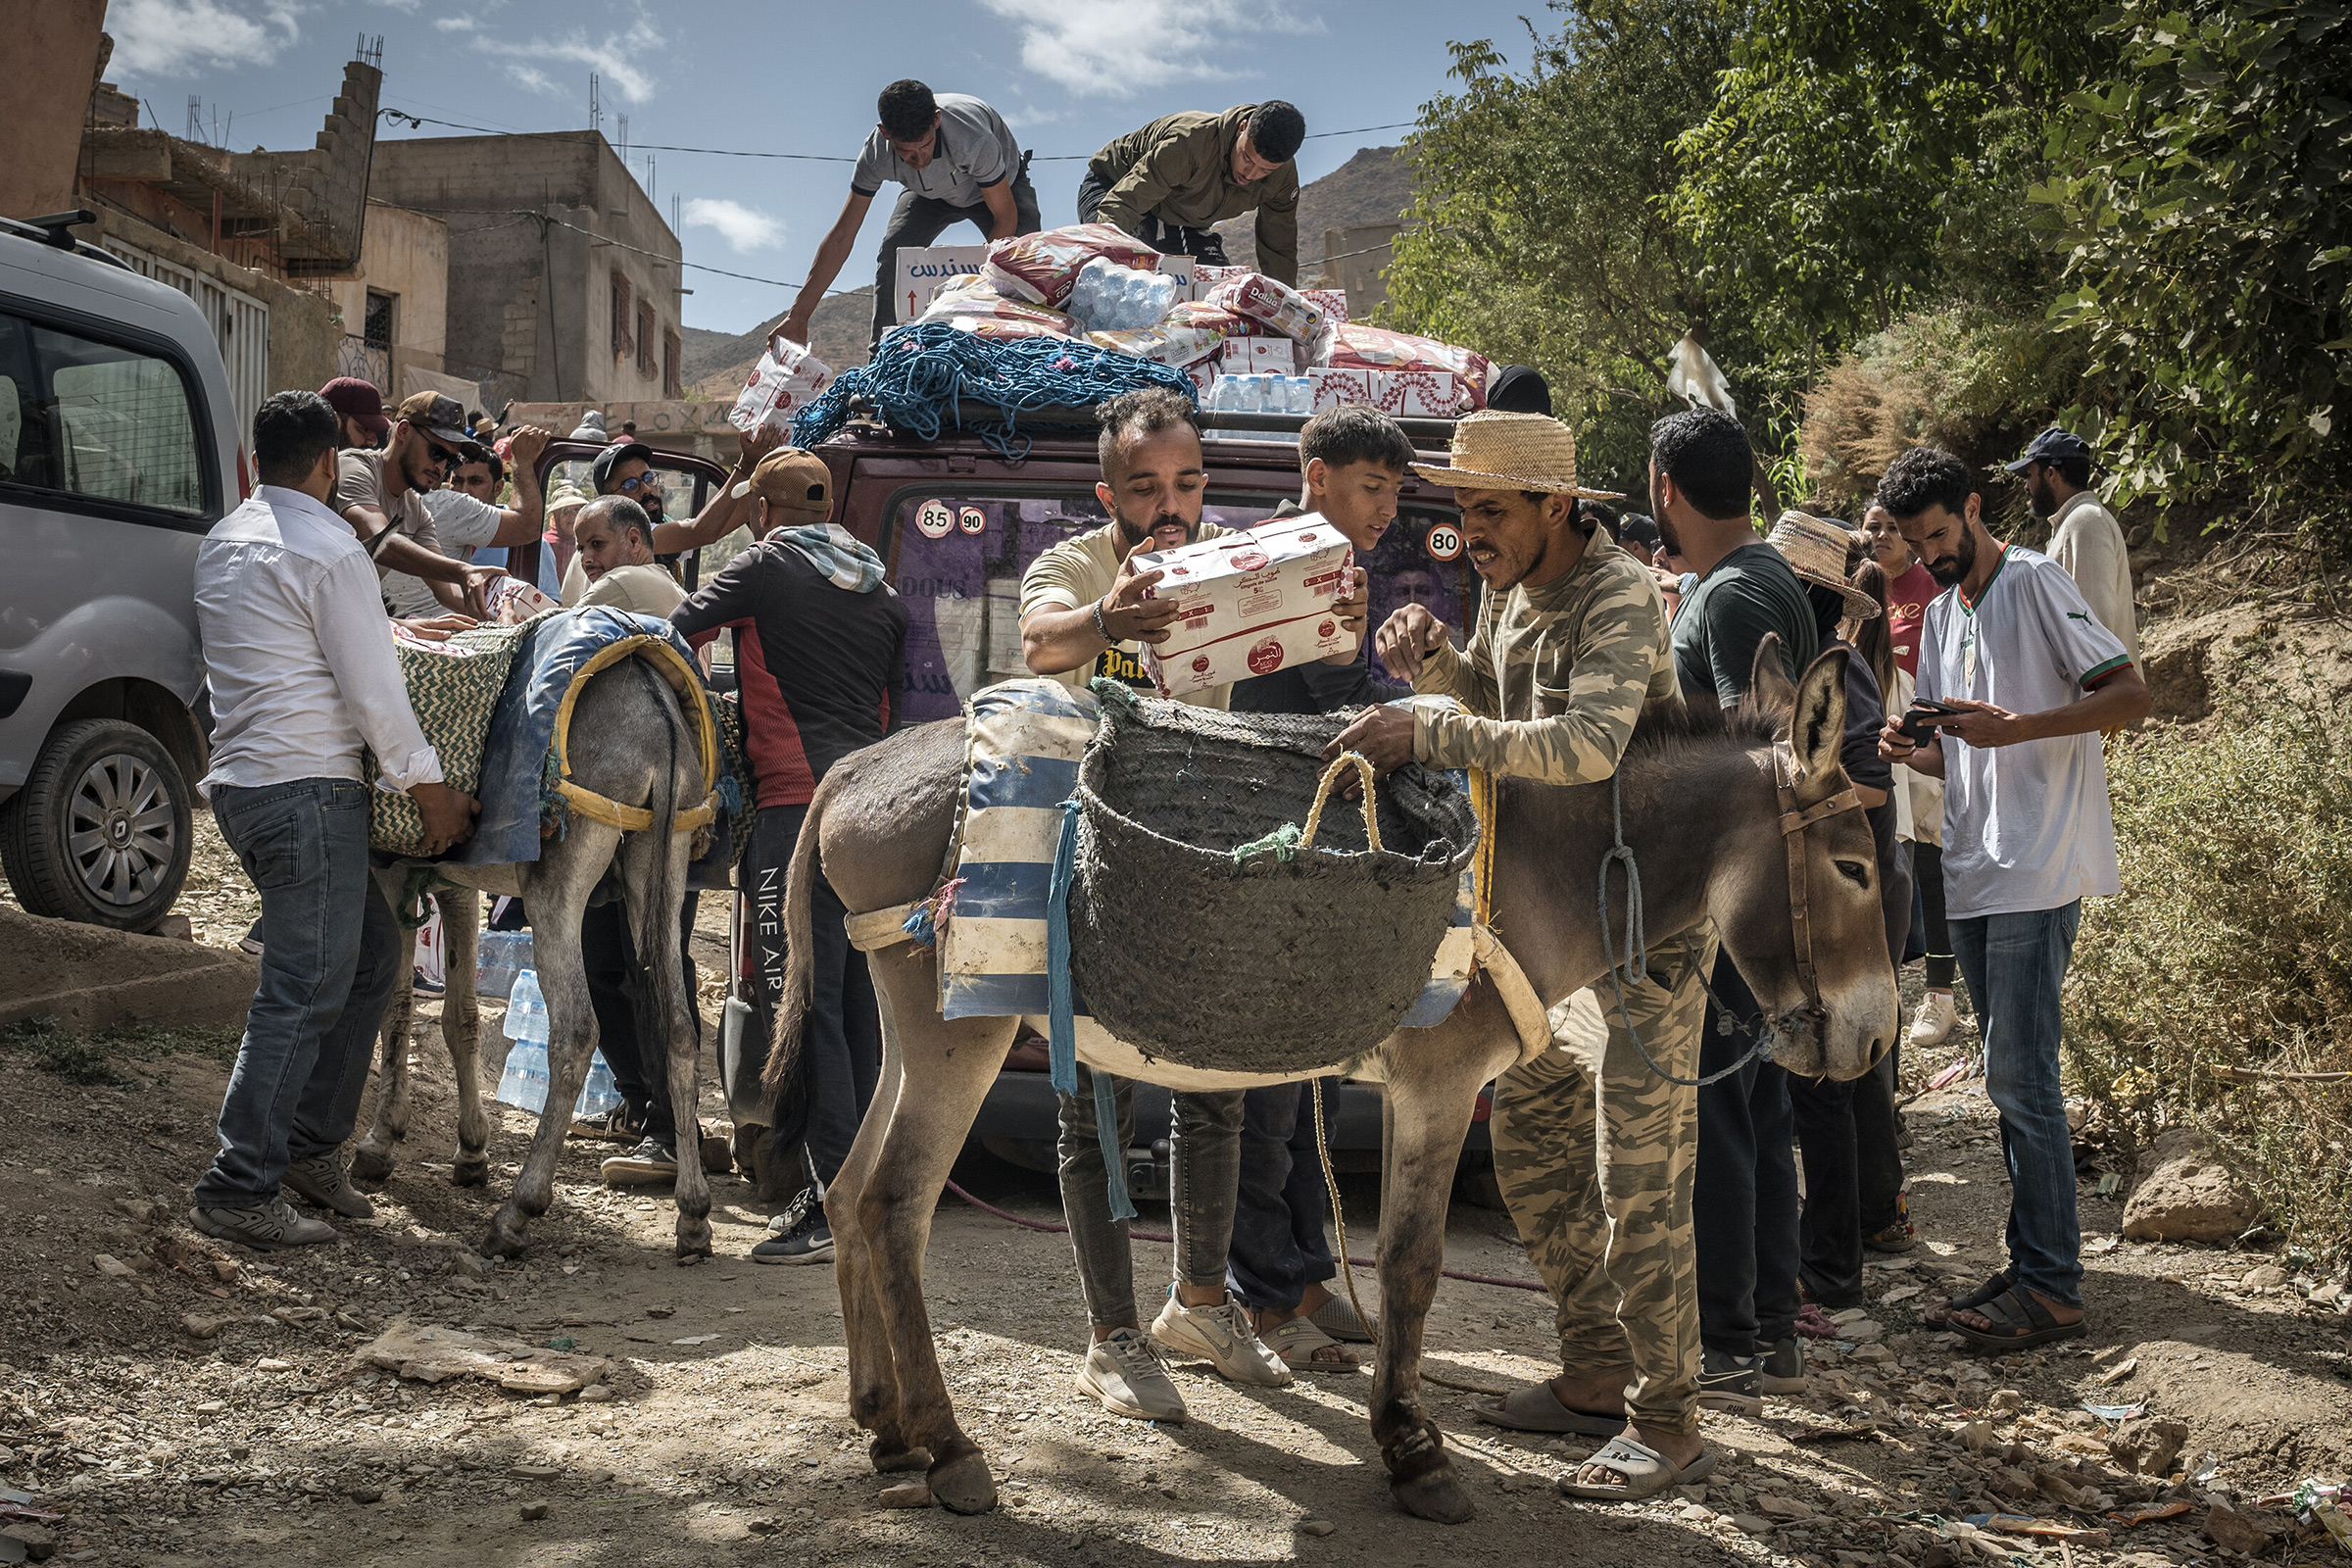 People load aid to donkeys to transport to hardly accessible houses in Douar Tnirt village in the Atlas Mountains in the hard-hit Al Haouz province on Sept. 10. (Sergey Ponomarev—The New York Times/Redux)